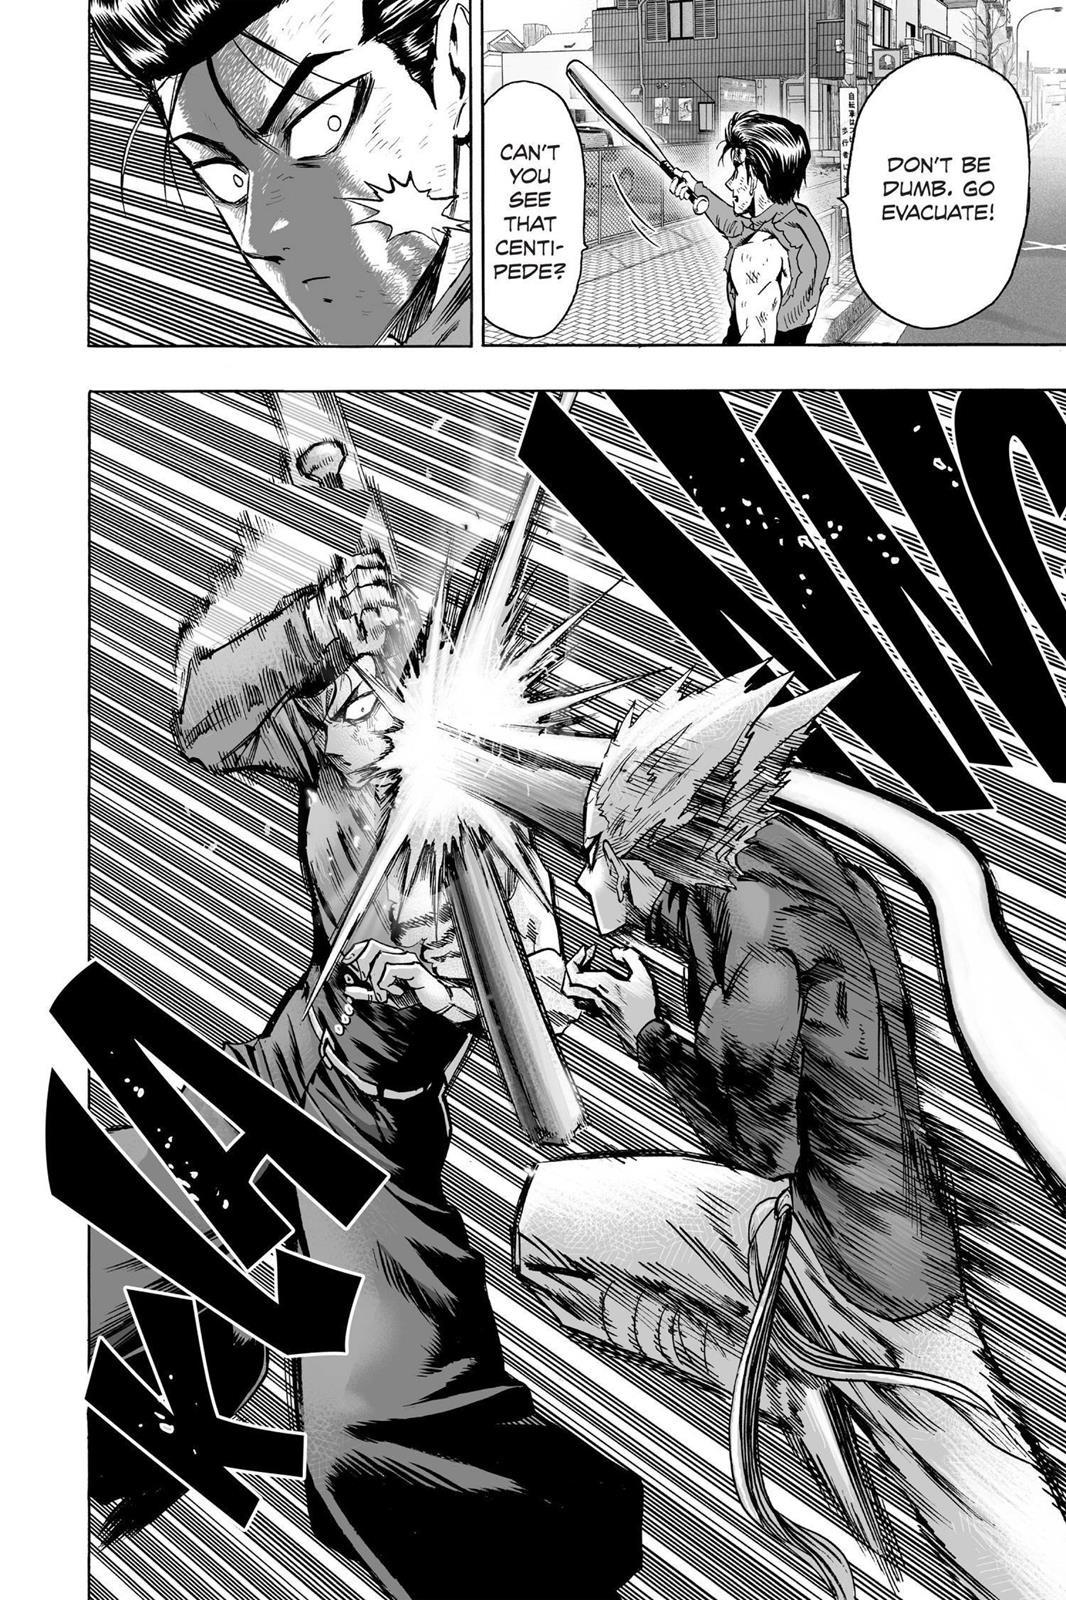 One-Punch Man, Punch 57 image 14